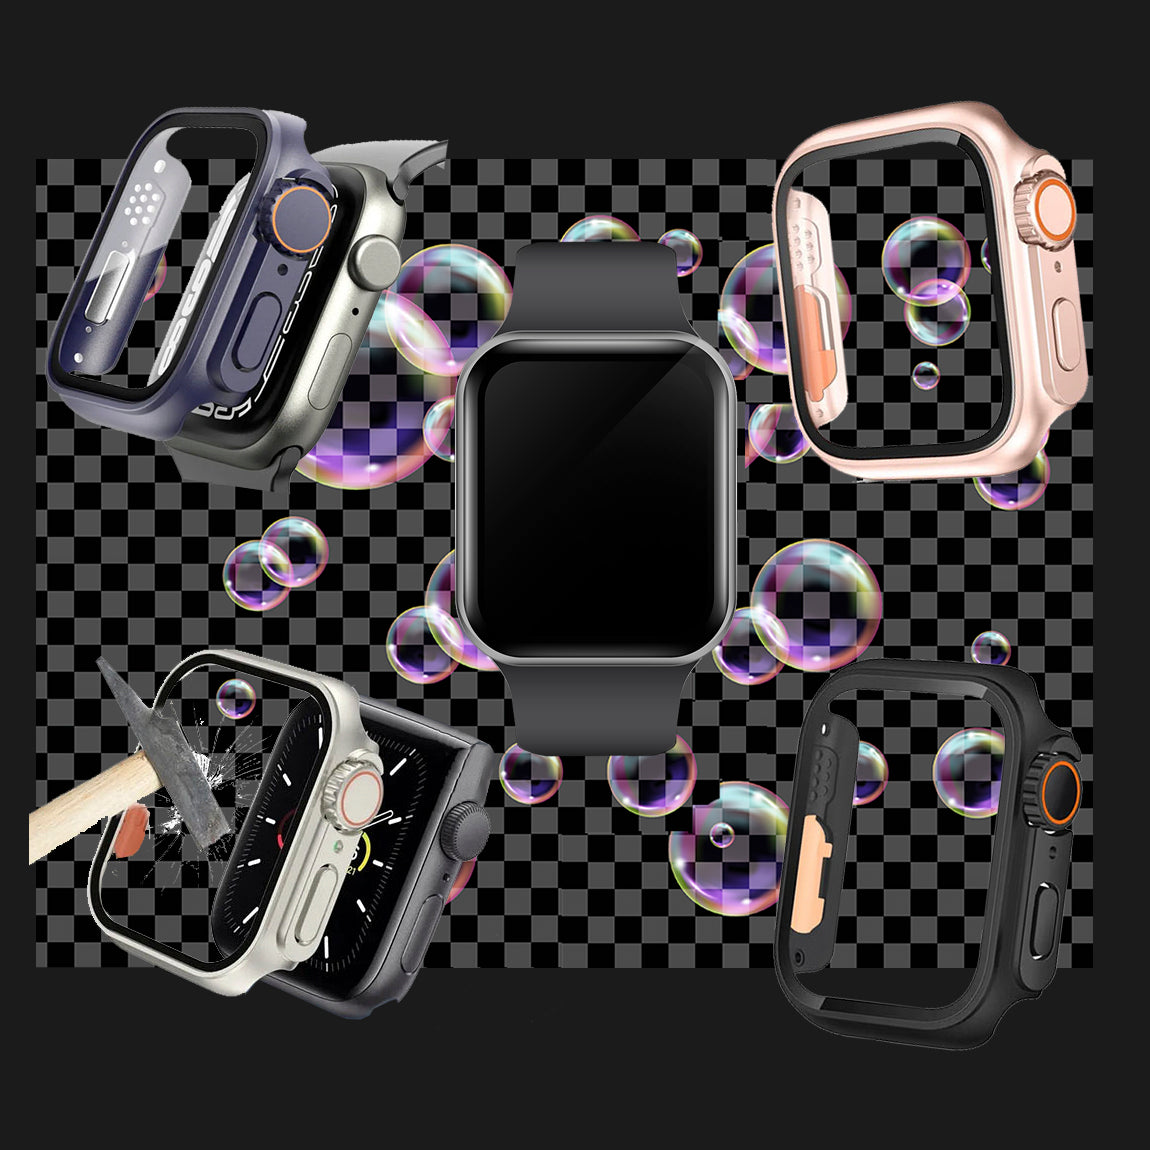 iWatch Cases for Sale Apple Watch covers for sale smart watch covers for sale - Raleigh NC Stonehenge Market Shopping Center - Accessories Sales